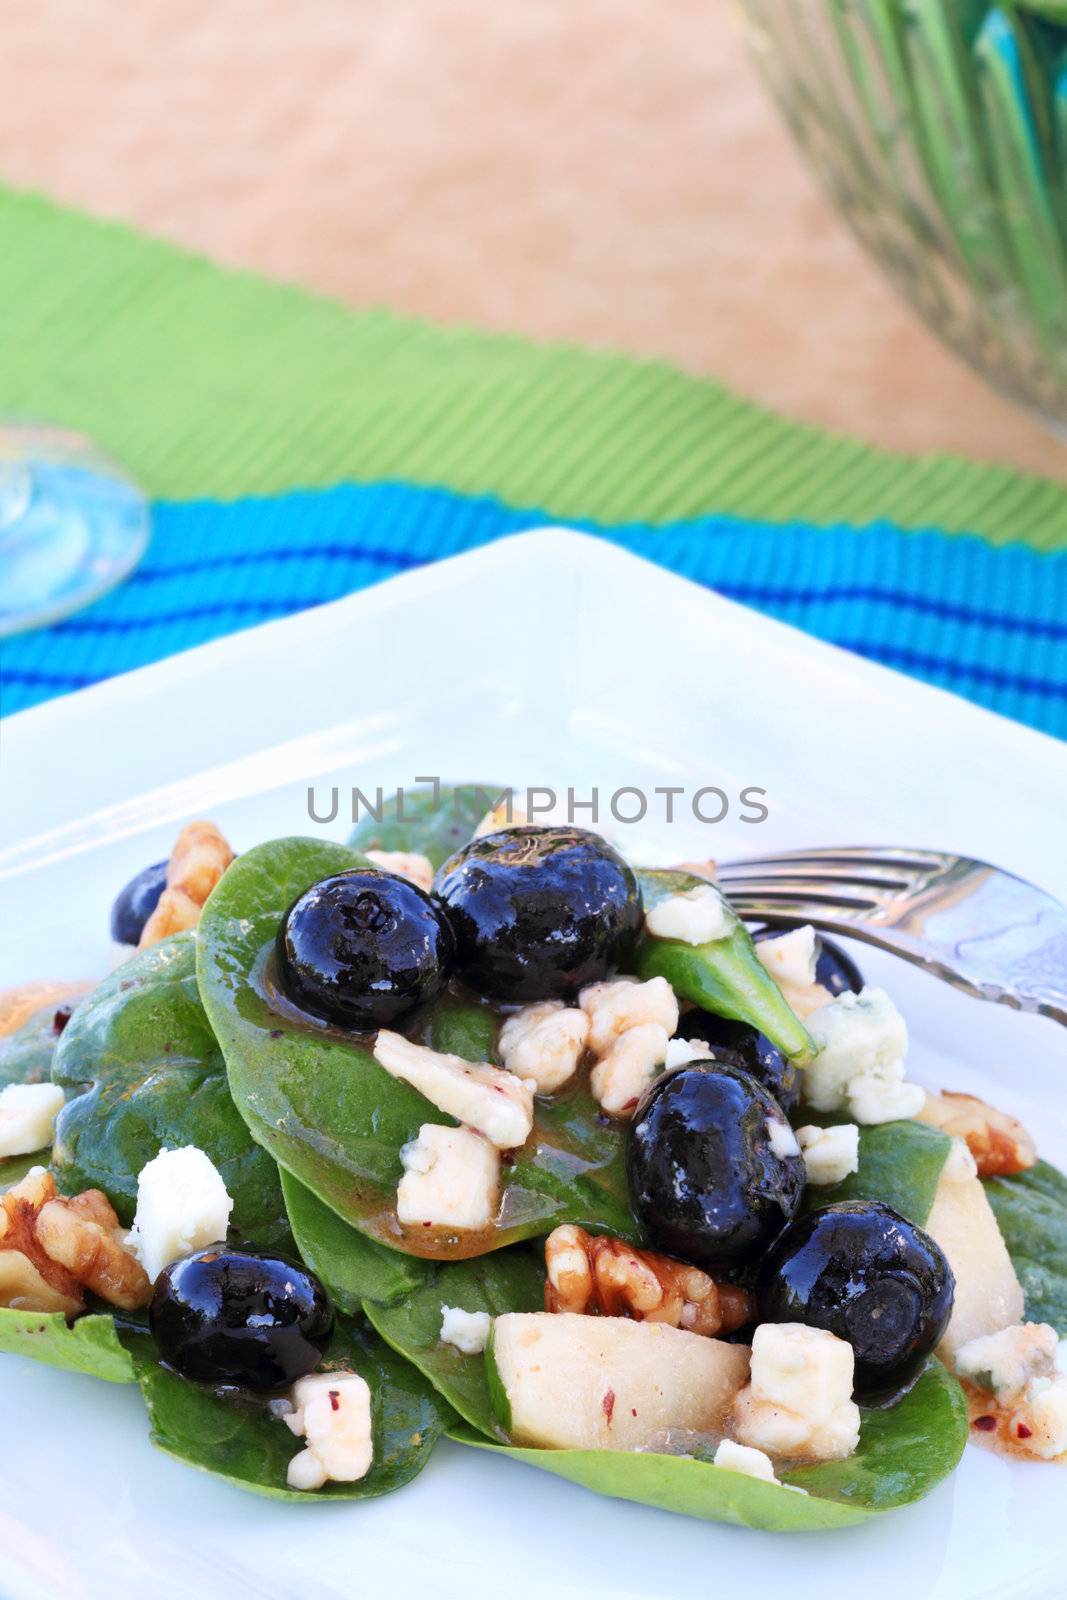 Spinach salad with gorgonzola cheese, walnuts, pears, blueberries and a raspberry vinaigrette.